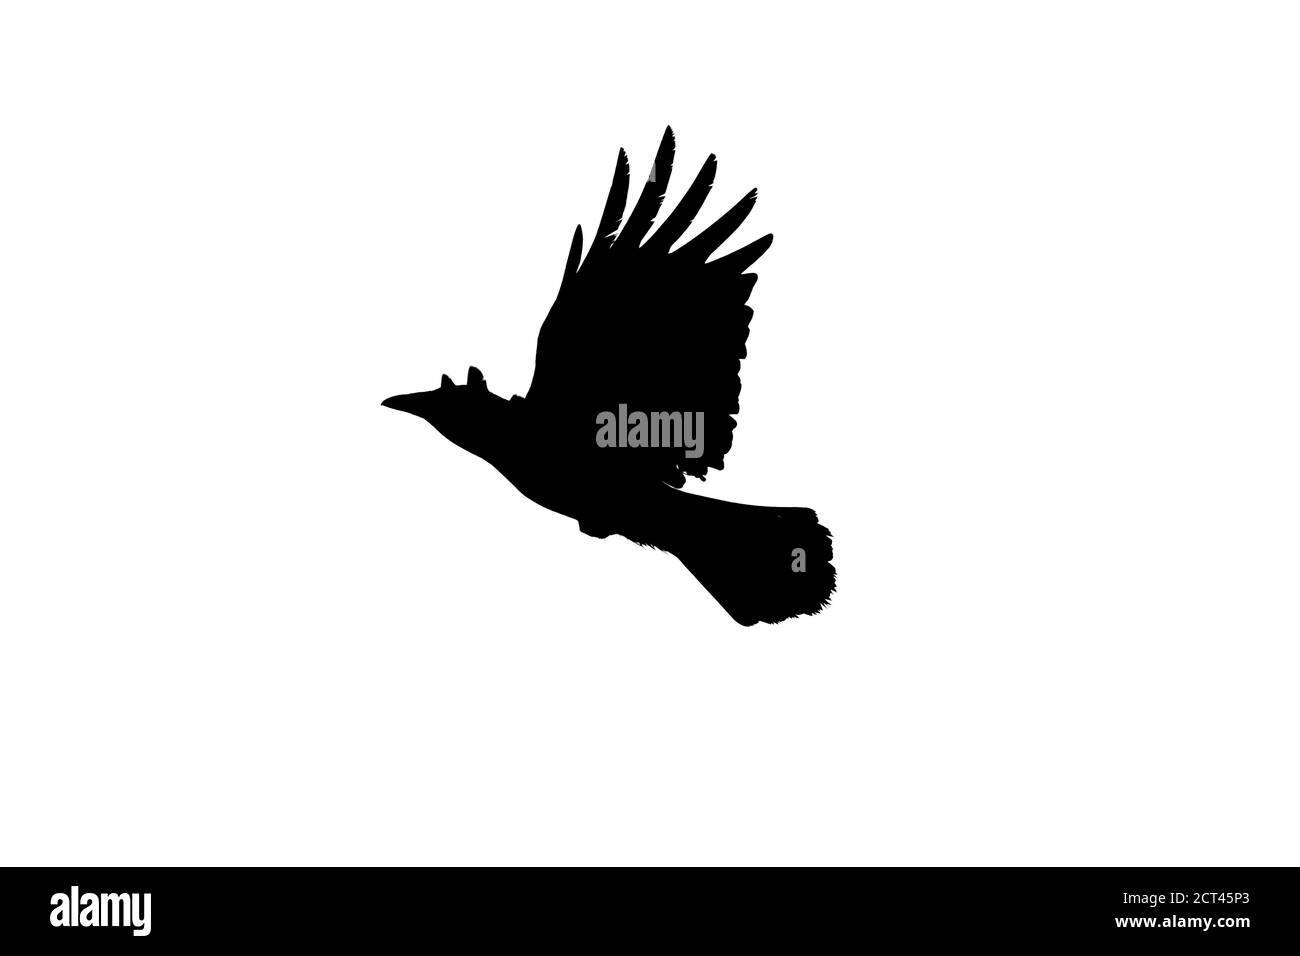 Flying crow, black silhouette photo isolated on white background Stock Photo